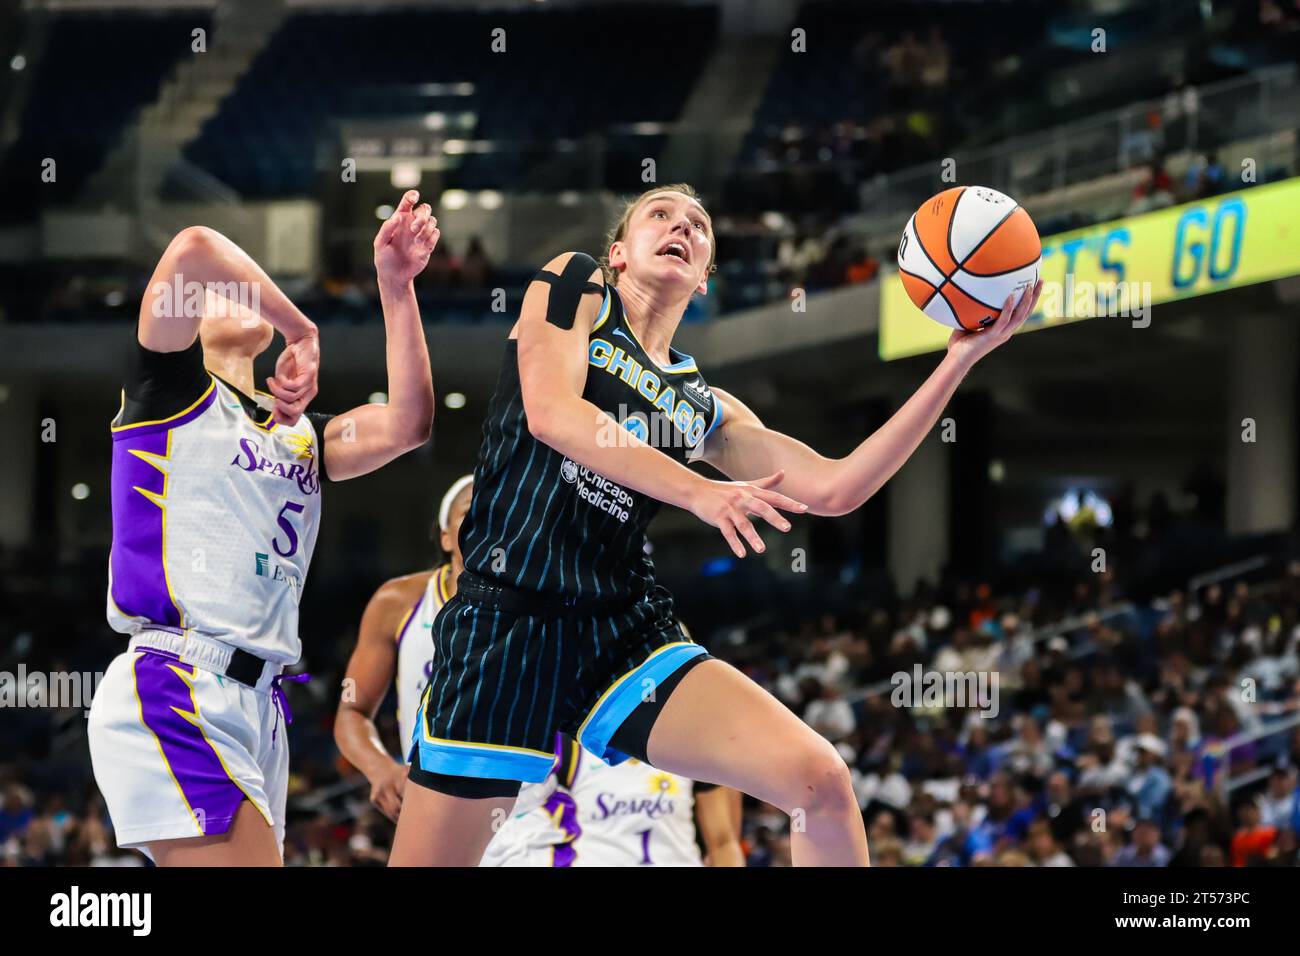 Alanna Smith going in for a layup in Chicago, IL at Wintrust Arena. Stock Photo